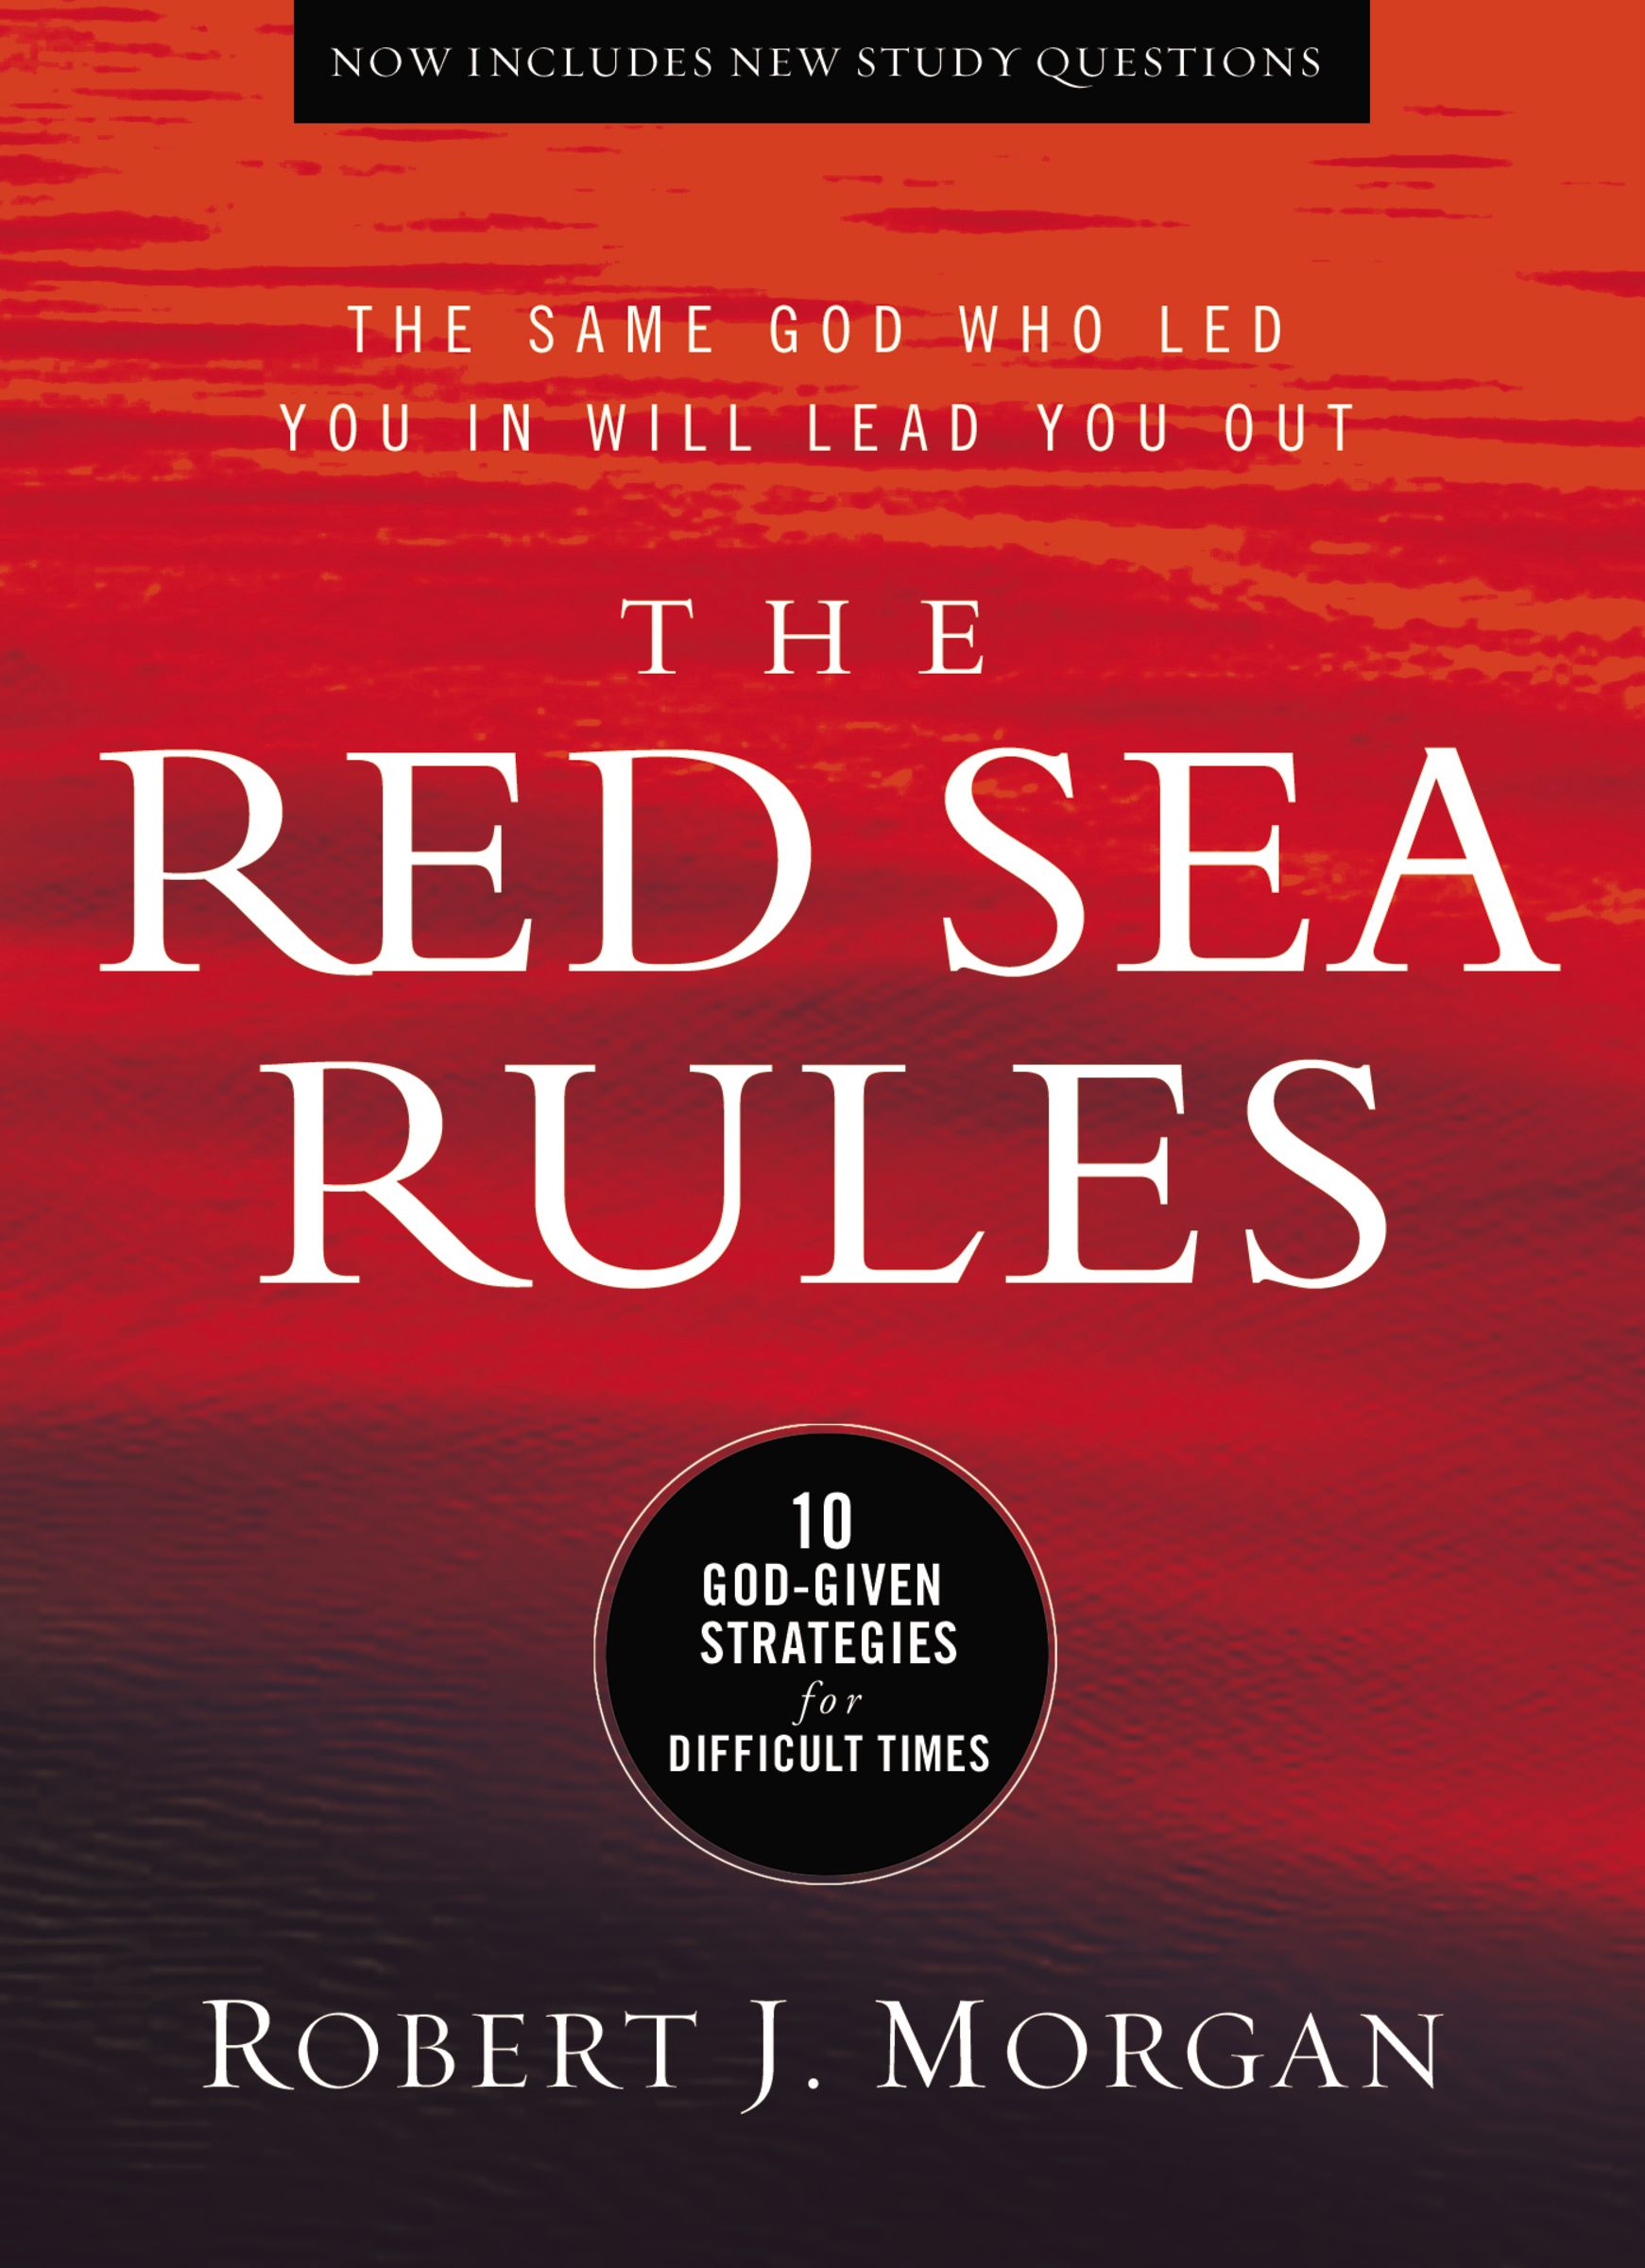 Image of The Red Sea Rules other